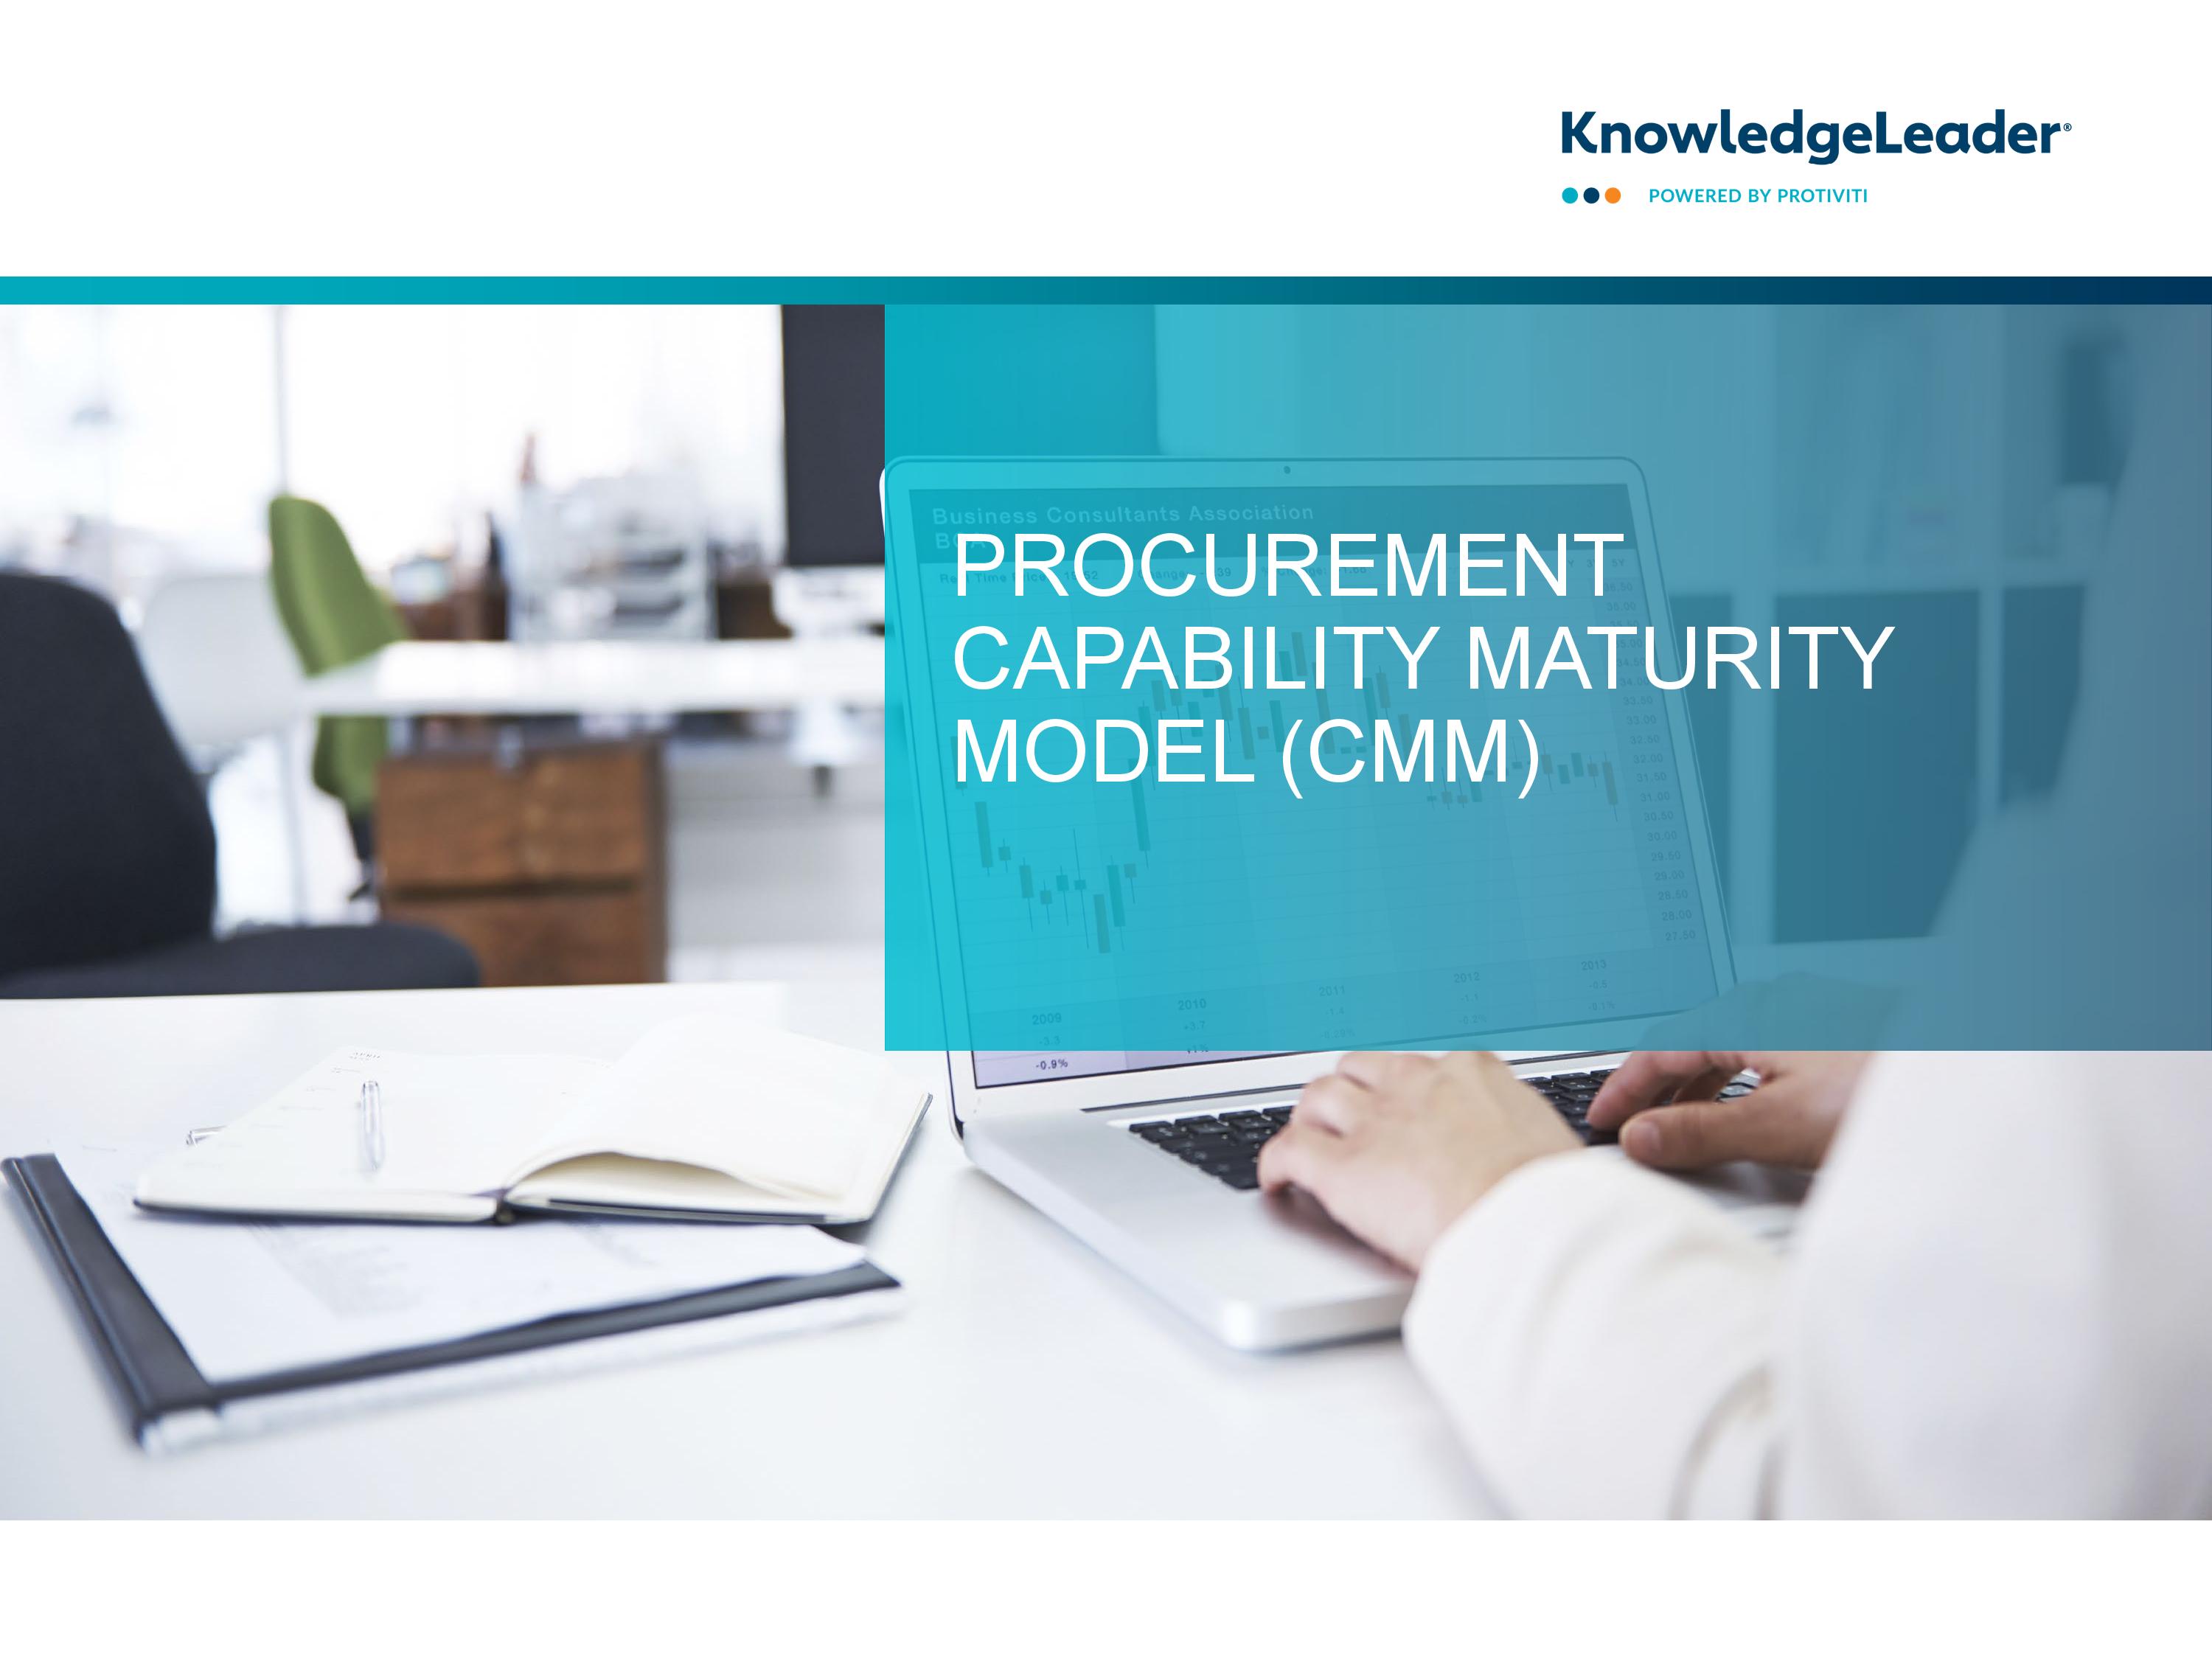 Screenshot of the First Page of Procurement Capability Maturity Model (CMM)